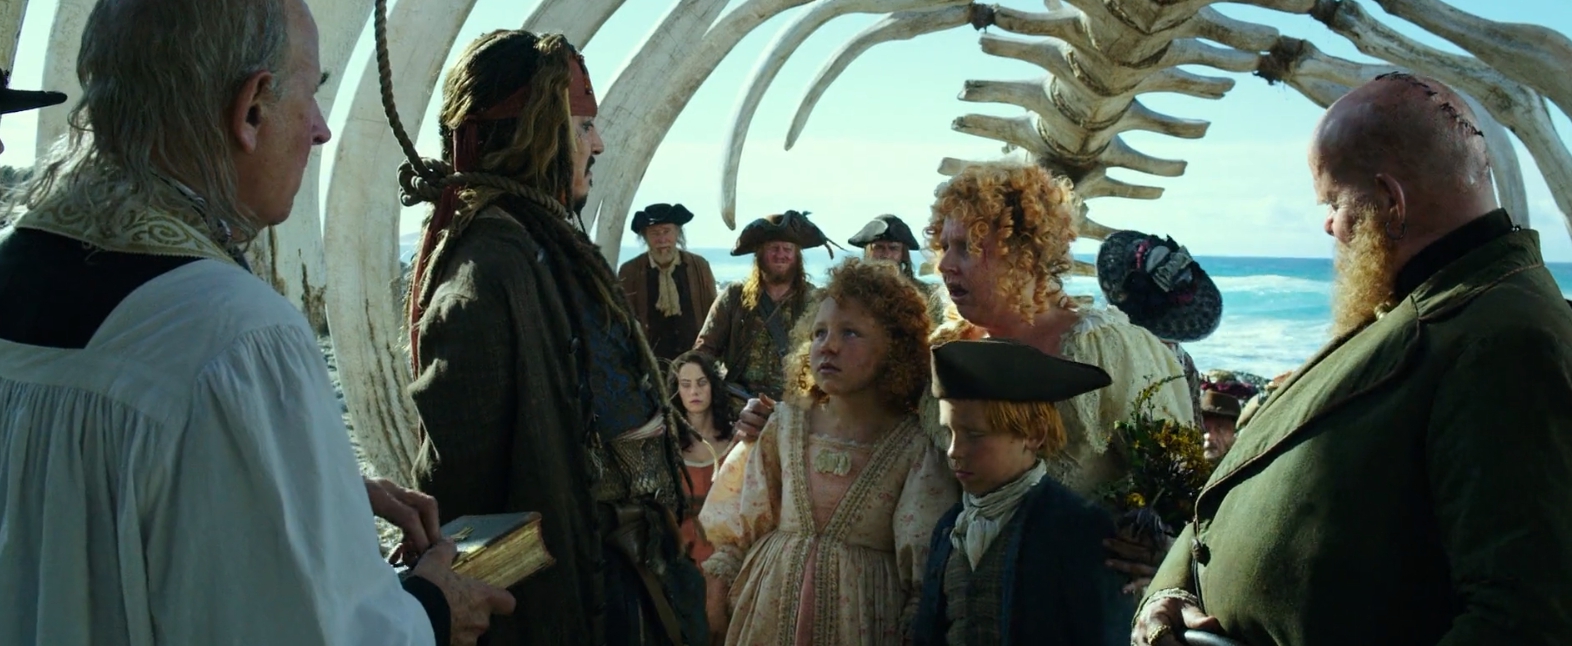 Pirates of the Caribbean: Dead Men Tell No Tales Movie Review